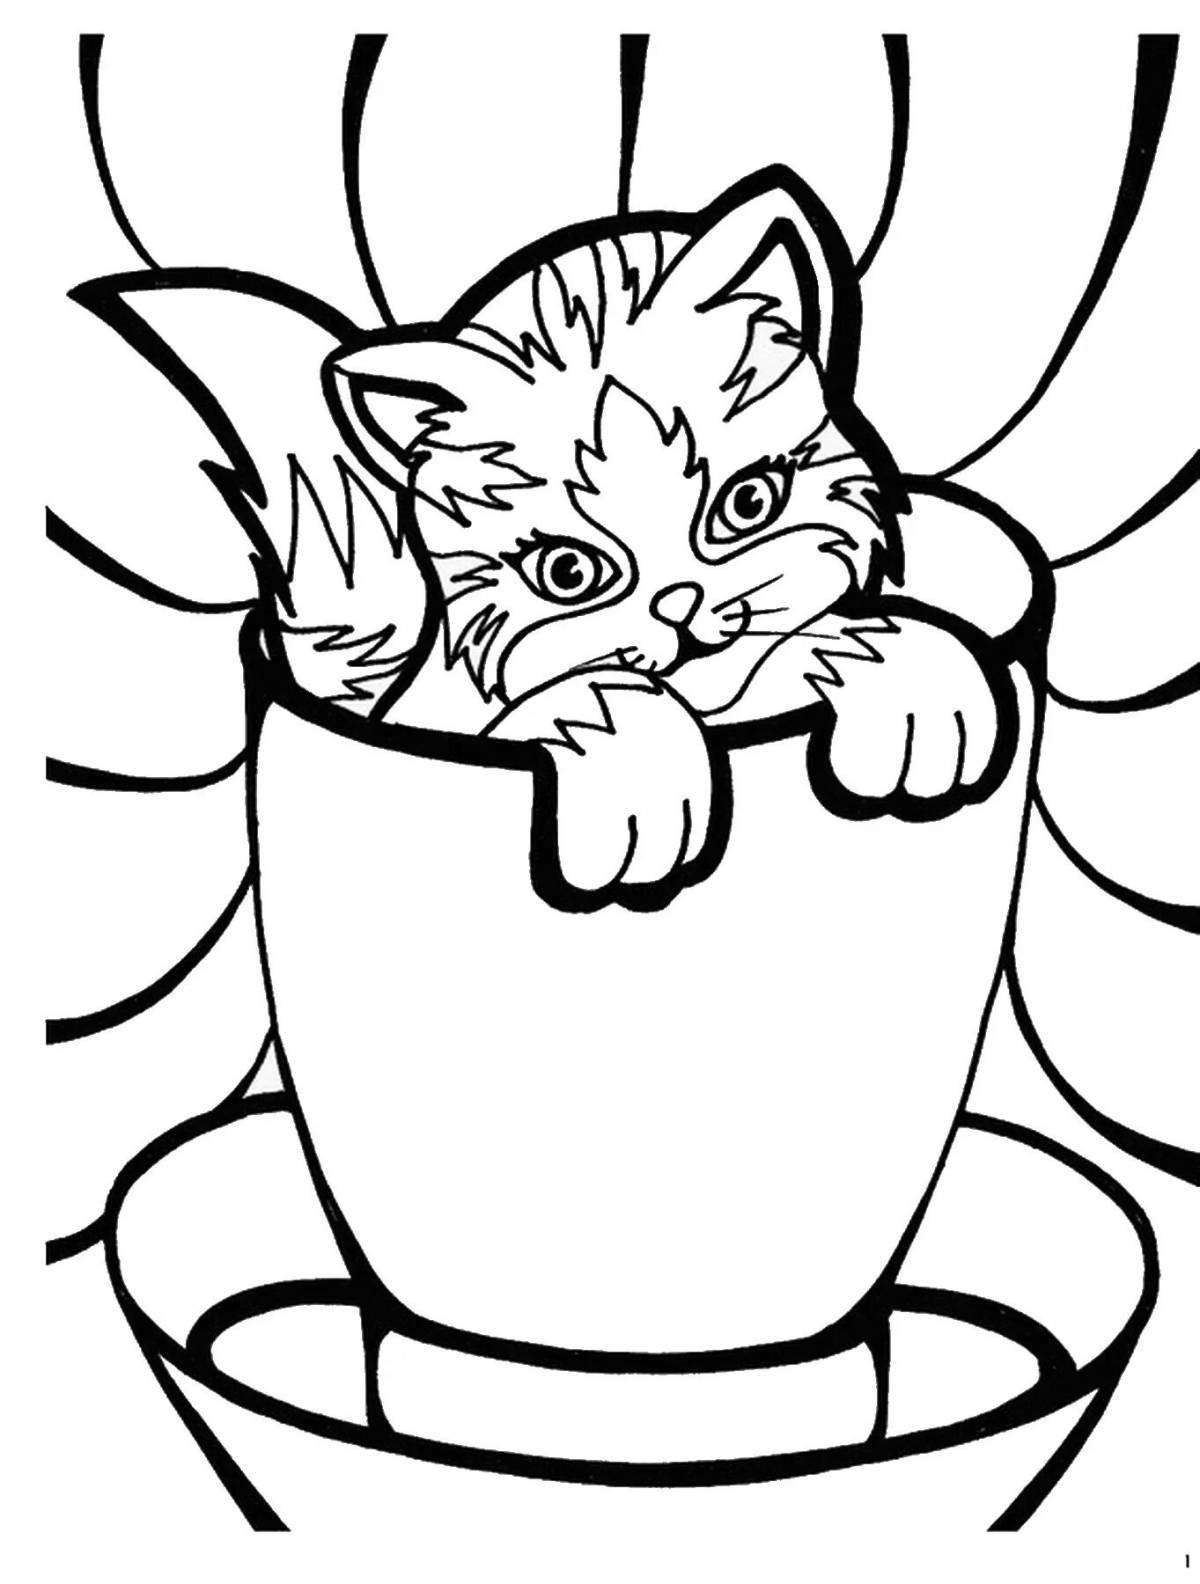 Coloring page funny cat in a cup